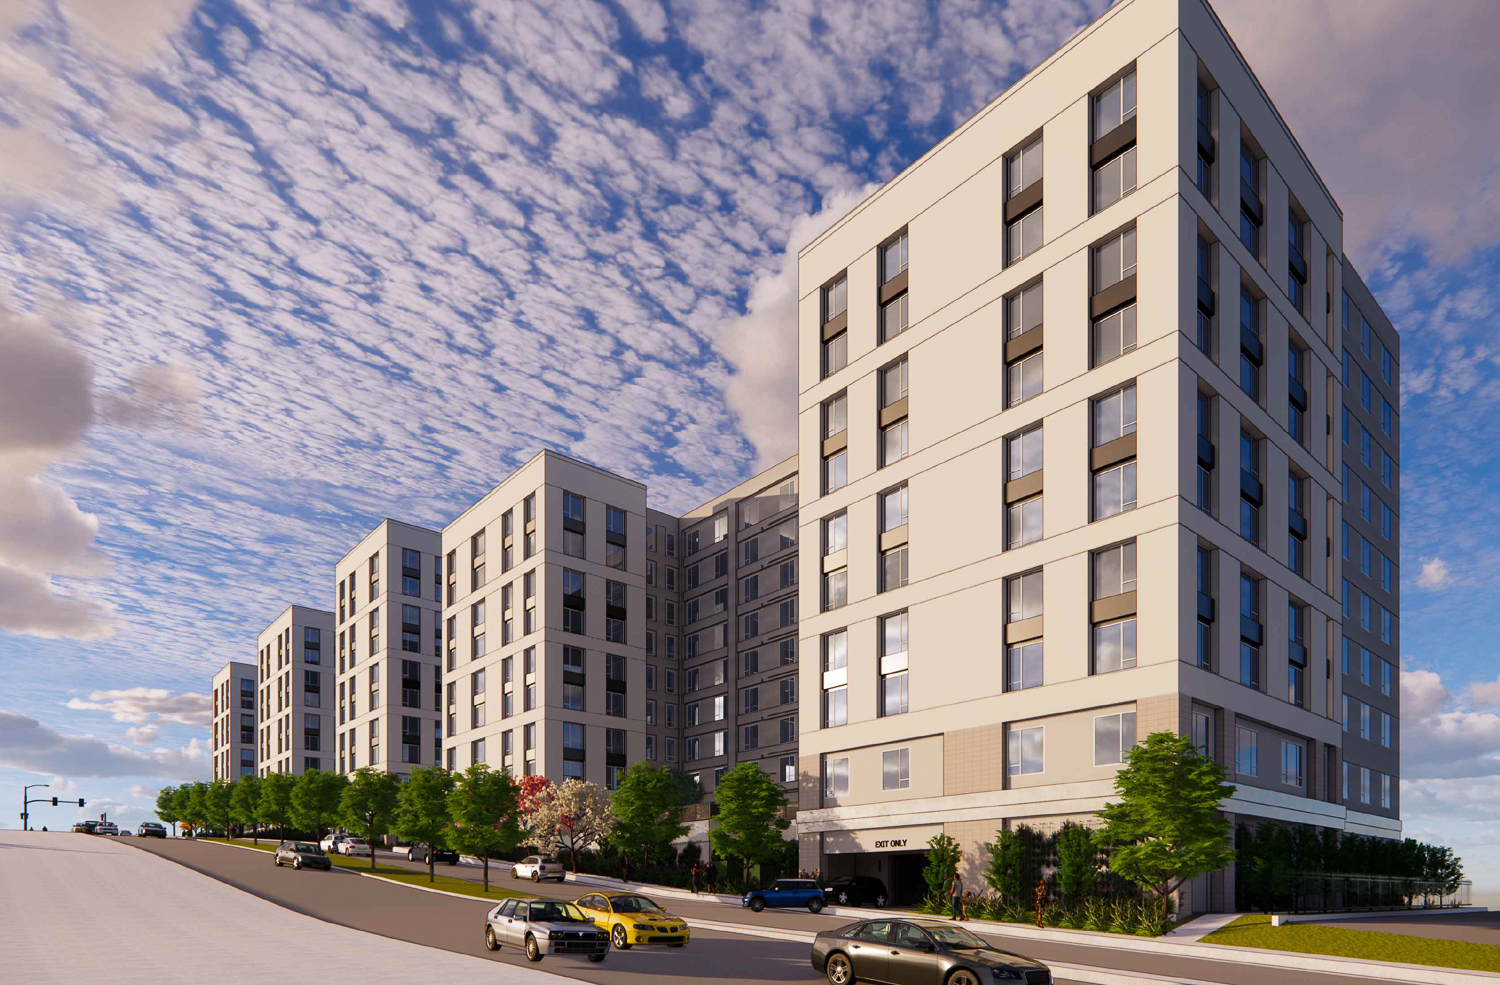 840 San Bruno Avenue view from by El Camino Real, rendering by KTGY